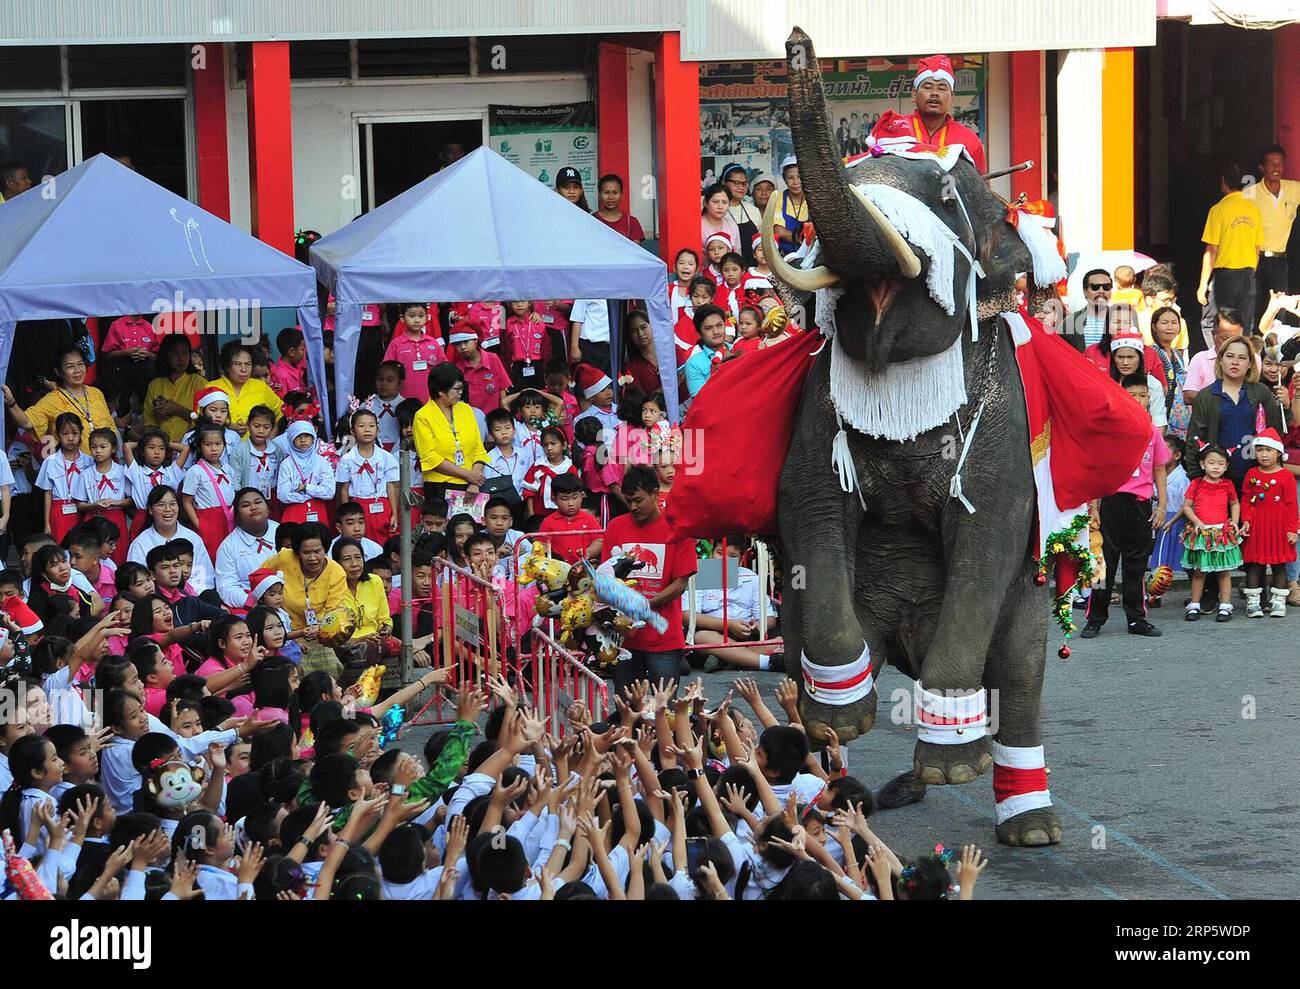 (181224) -- AYUTTHAYA, Dec. 24, 2018 (Xinhua) -- An elephant distributes gifts to students during Christmas celebrations at a school in Ayutthaya province, Thailand, Dec. 24, 2018. The annual event is held to celebrate Christmas and promote tourism in Ayutthaya. (Xinhua/Rachen Sageamsak) THAILAND-AYUTTHAYA-CHRISTMAS PUBLICATIONxNOTxINxCHN Stock Photo